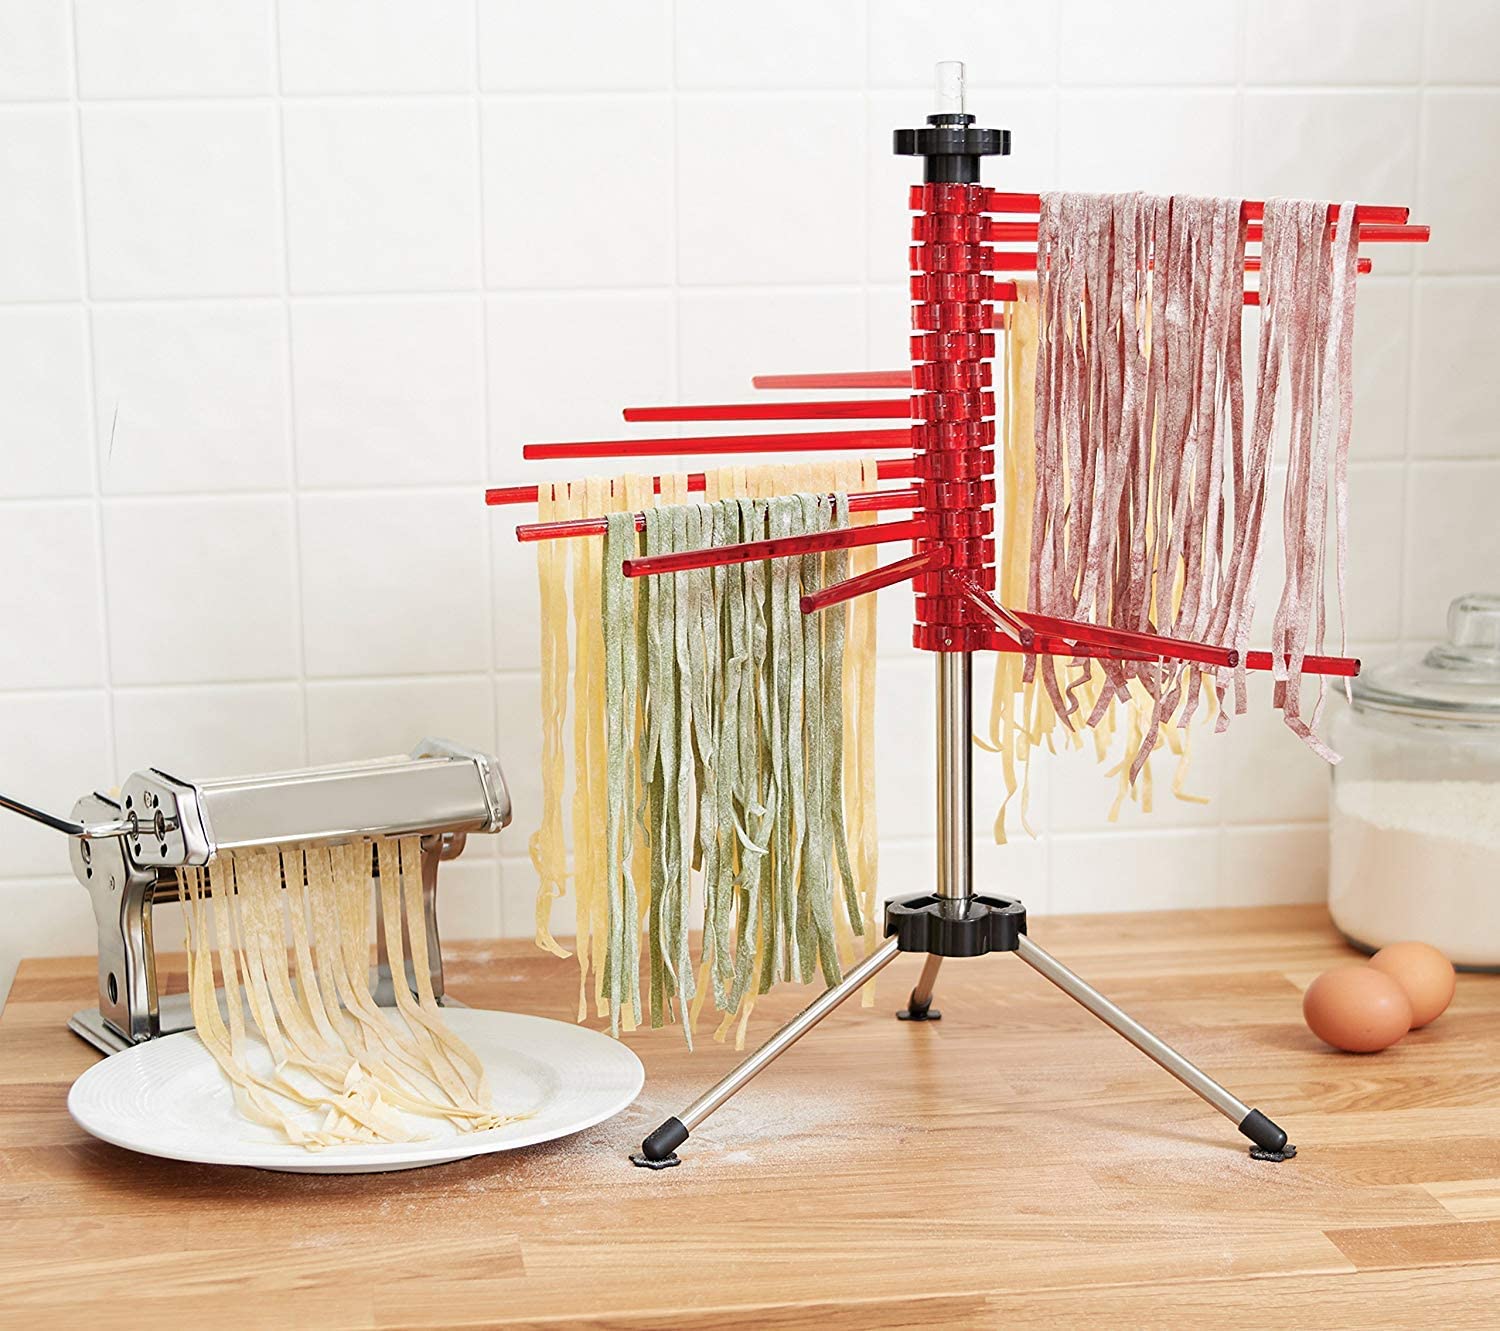 GOURMEX Red Pasta Maker Drying Rack | Easy Collapsible Rack for Simple Storage